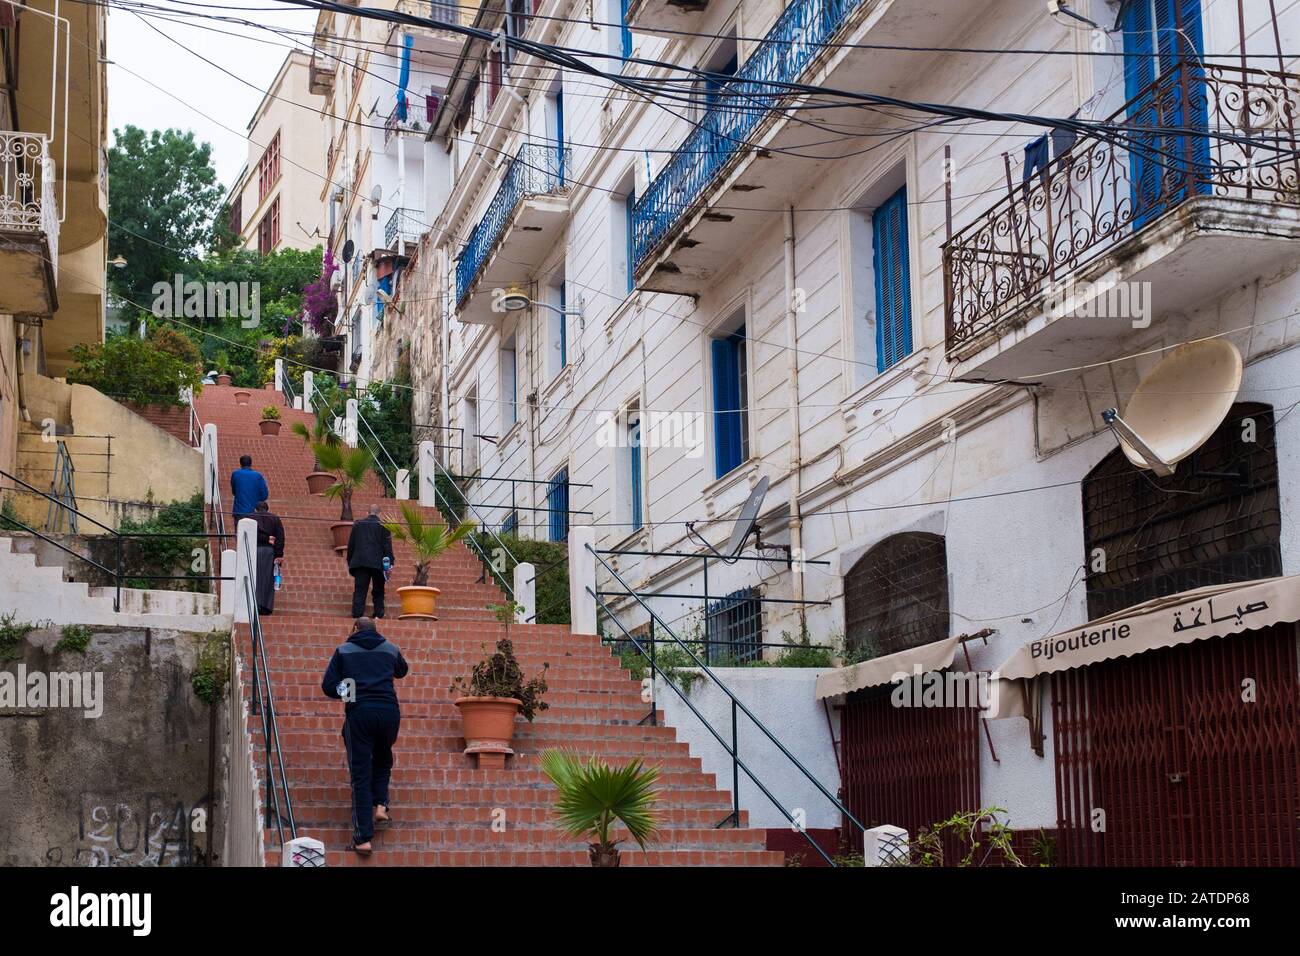 French architecture has left its blue shutters and town squares in Bejaia, a port city on the northern coast of Algeria on the Mediterranean sea. Stock Photo